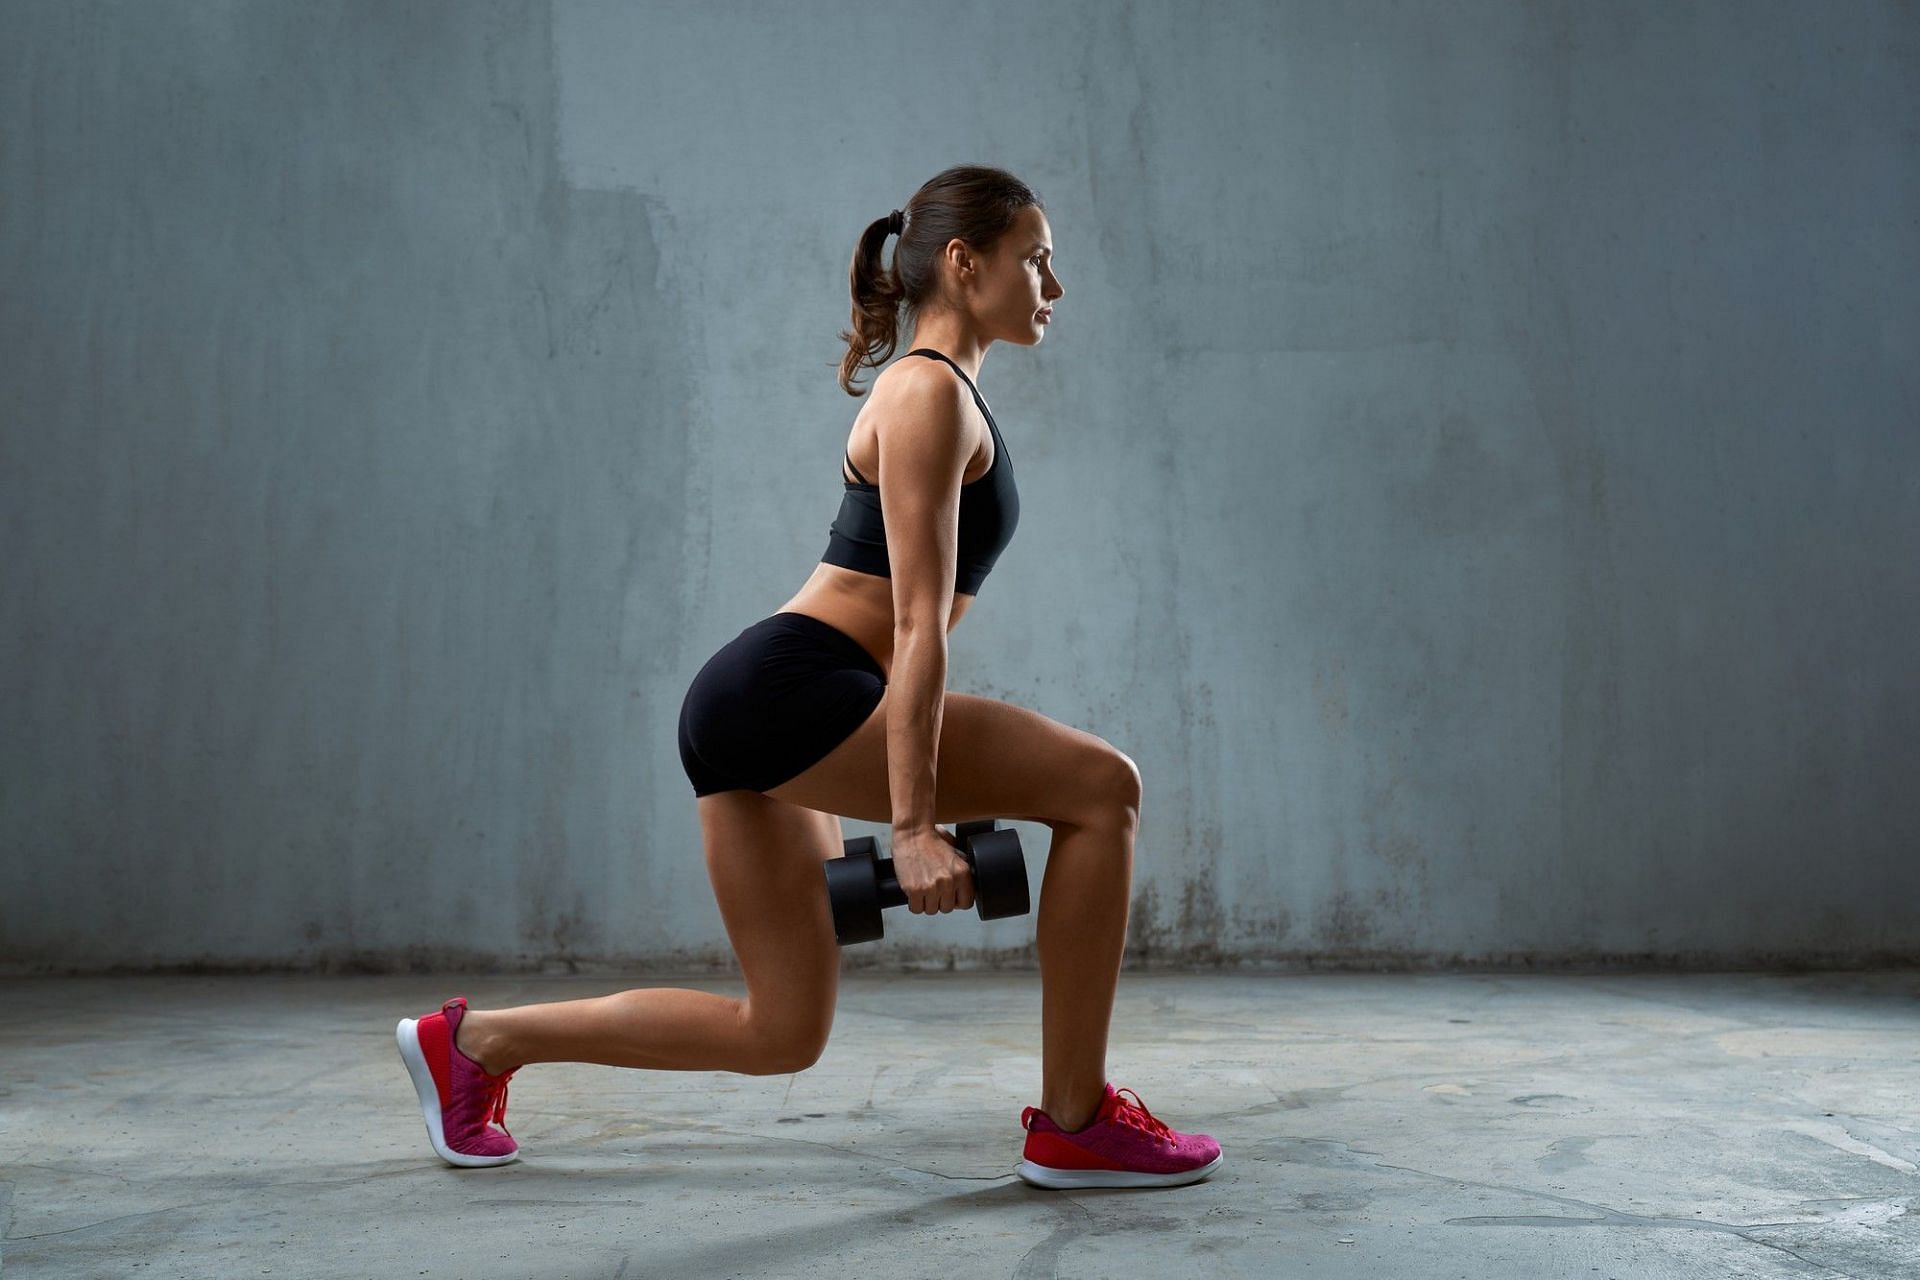 How to do lunges with dumbbells? (Image via Freepik)